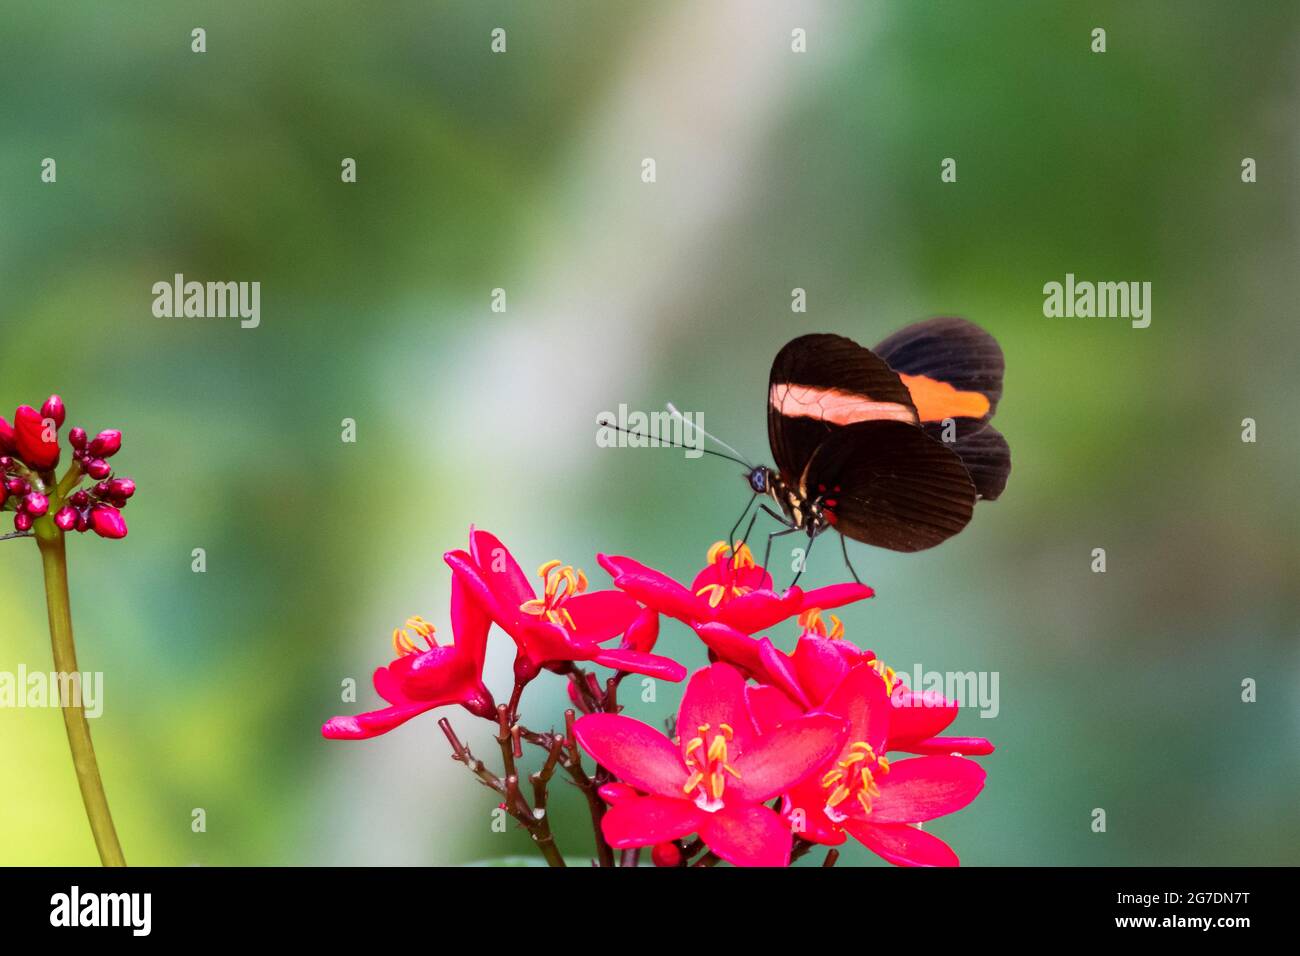 A Postman butterfly feeding on nectar from a pink flower. Tropical butterfly in a garden. Stock Photo